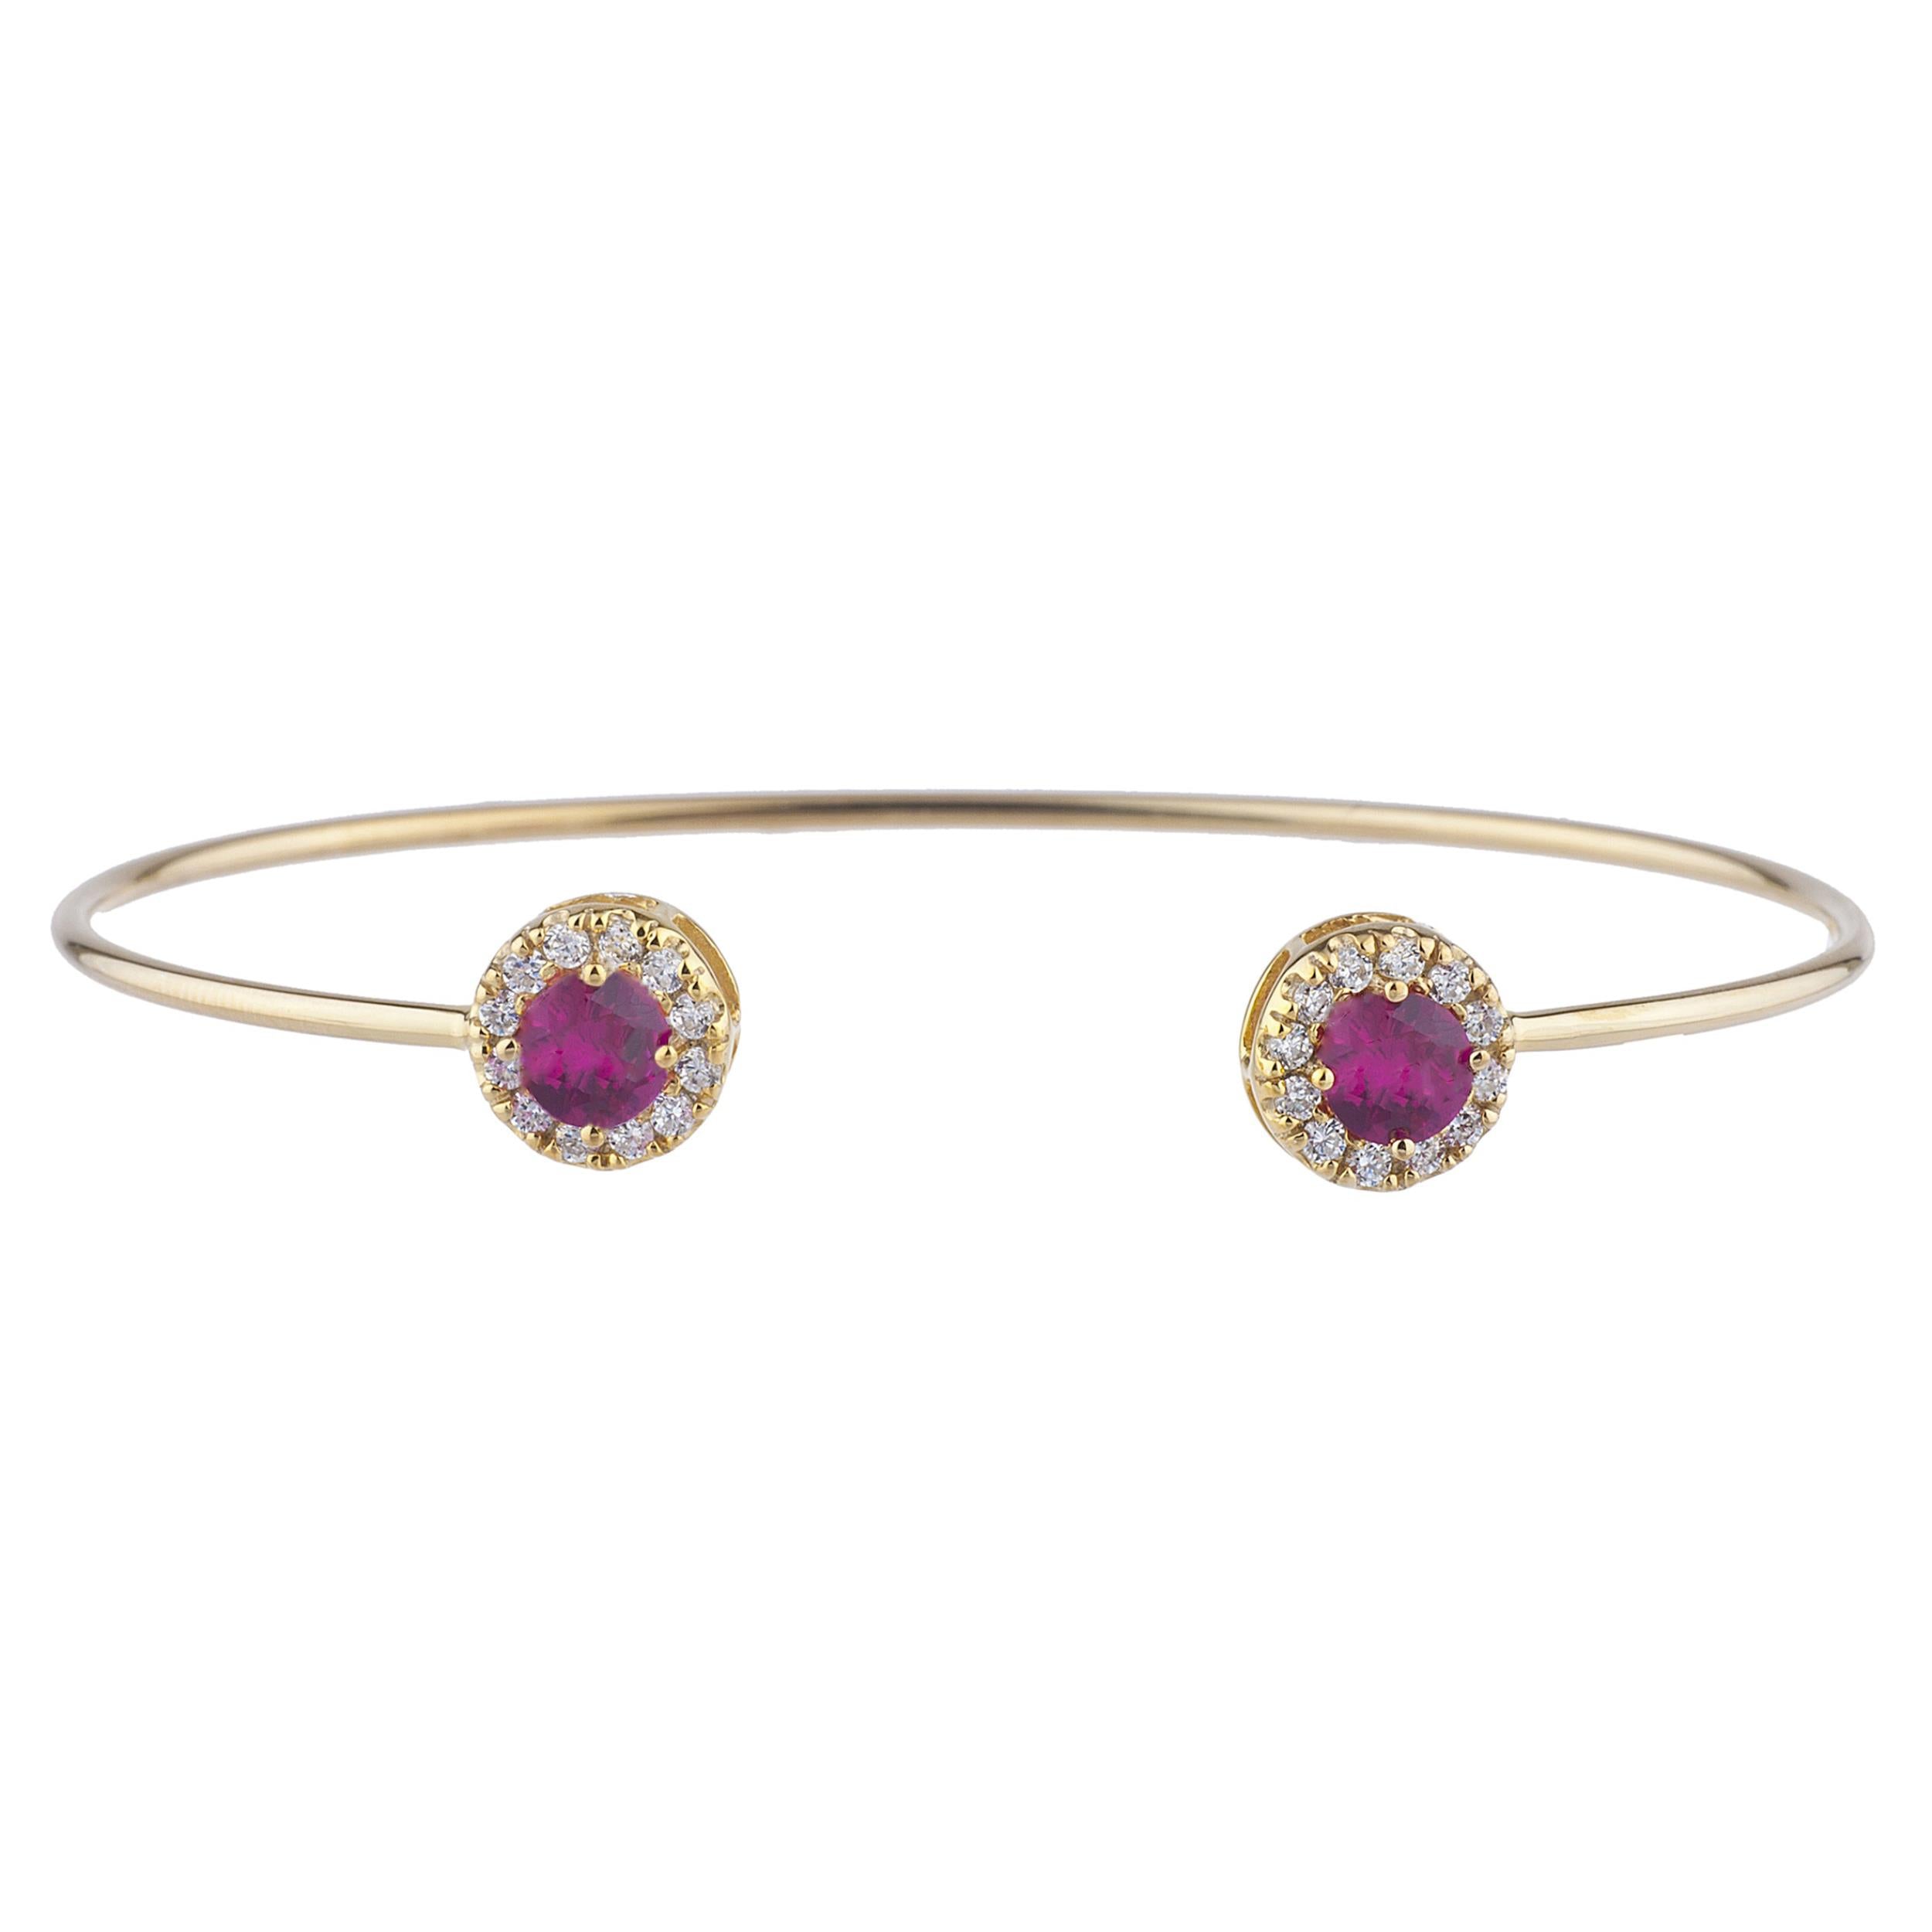 1 Ct Created Ruby Halo Design Round Bangle Bracelet 14Kt Yellow Gold Rose Gold Silver